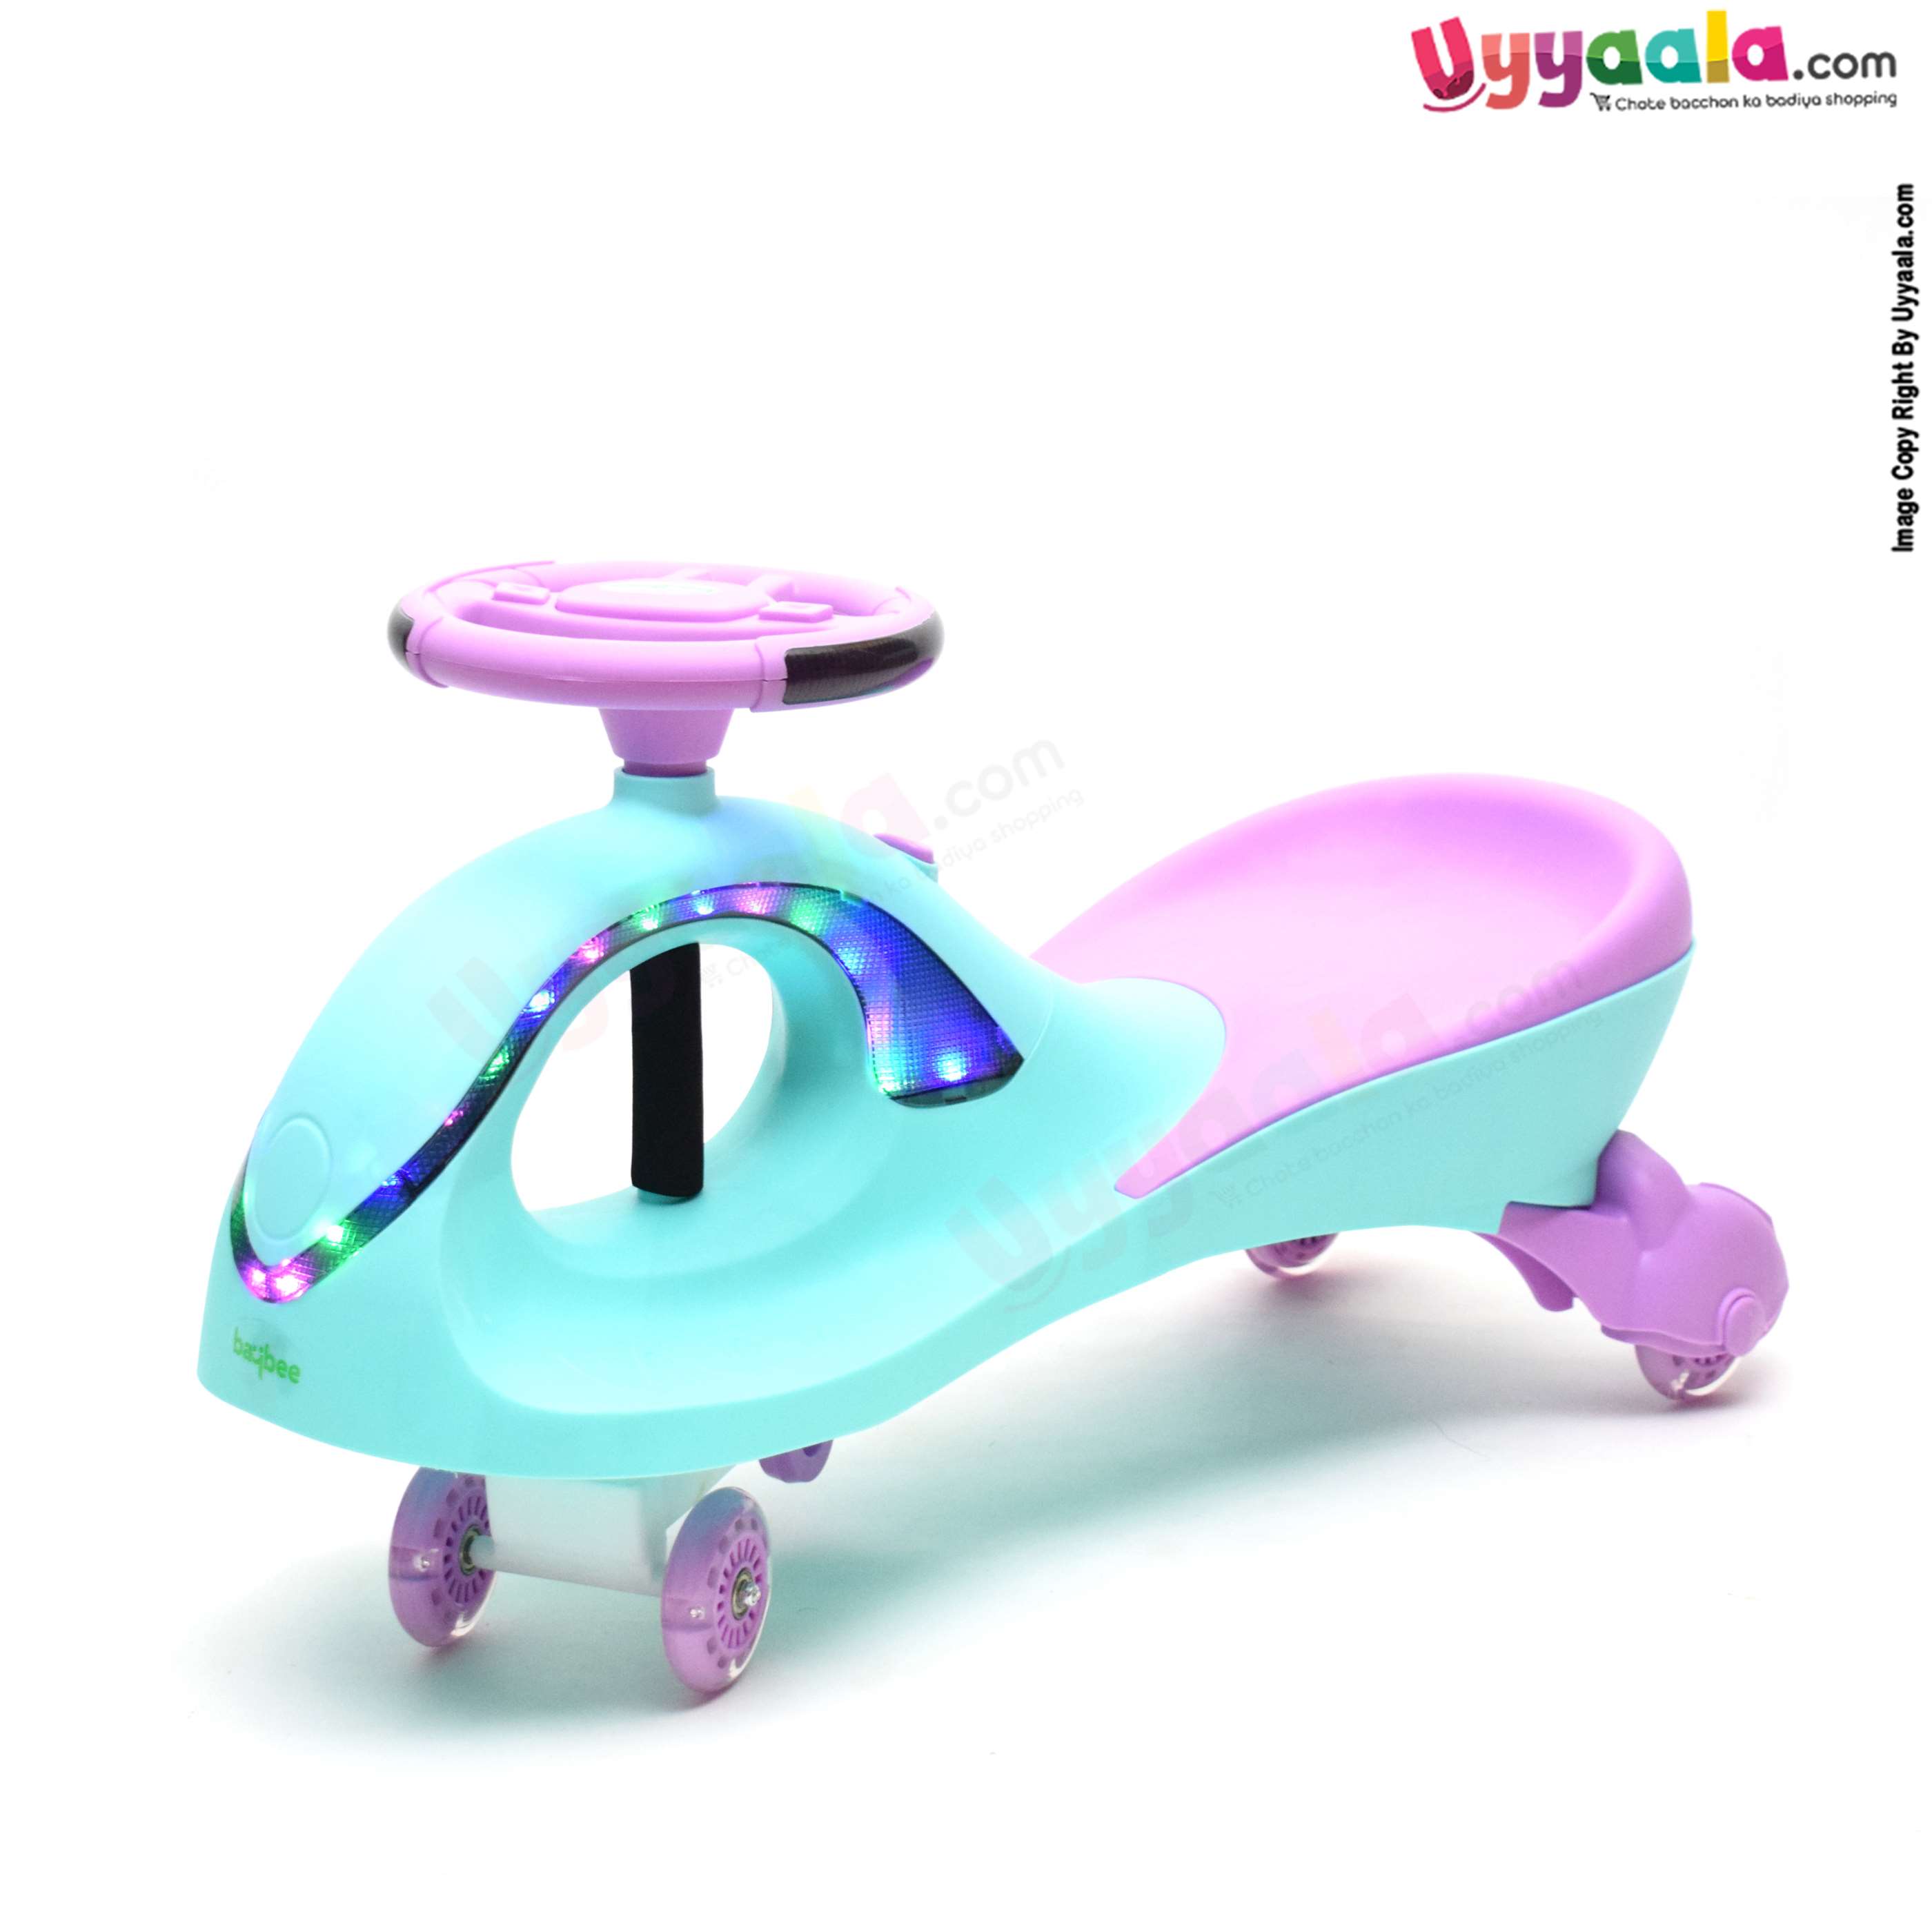 BAYBEE Twister magic car for kids with music & lights- green